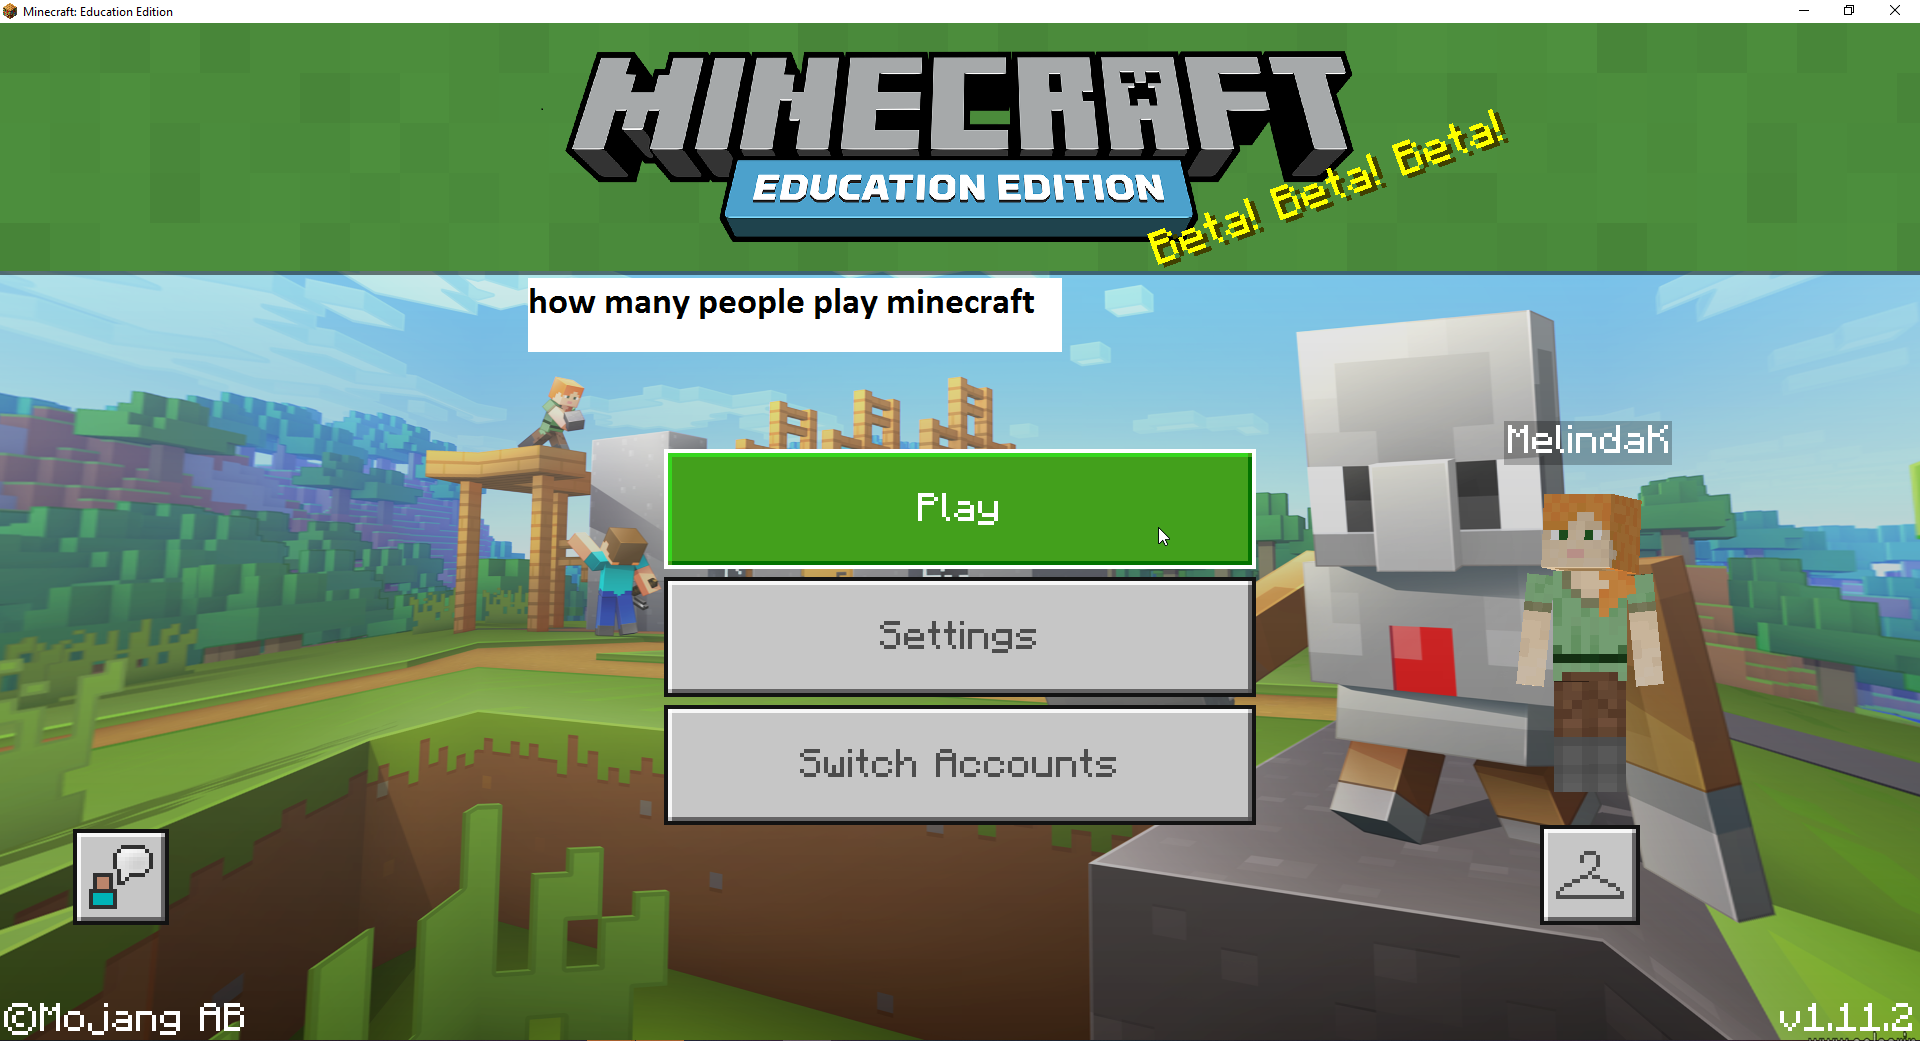 how many people play minecraft